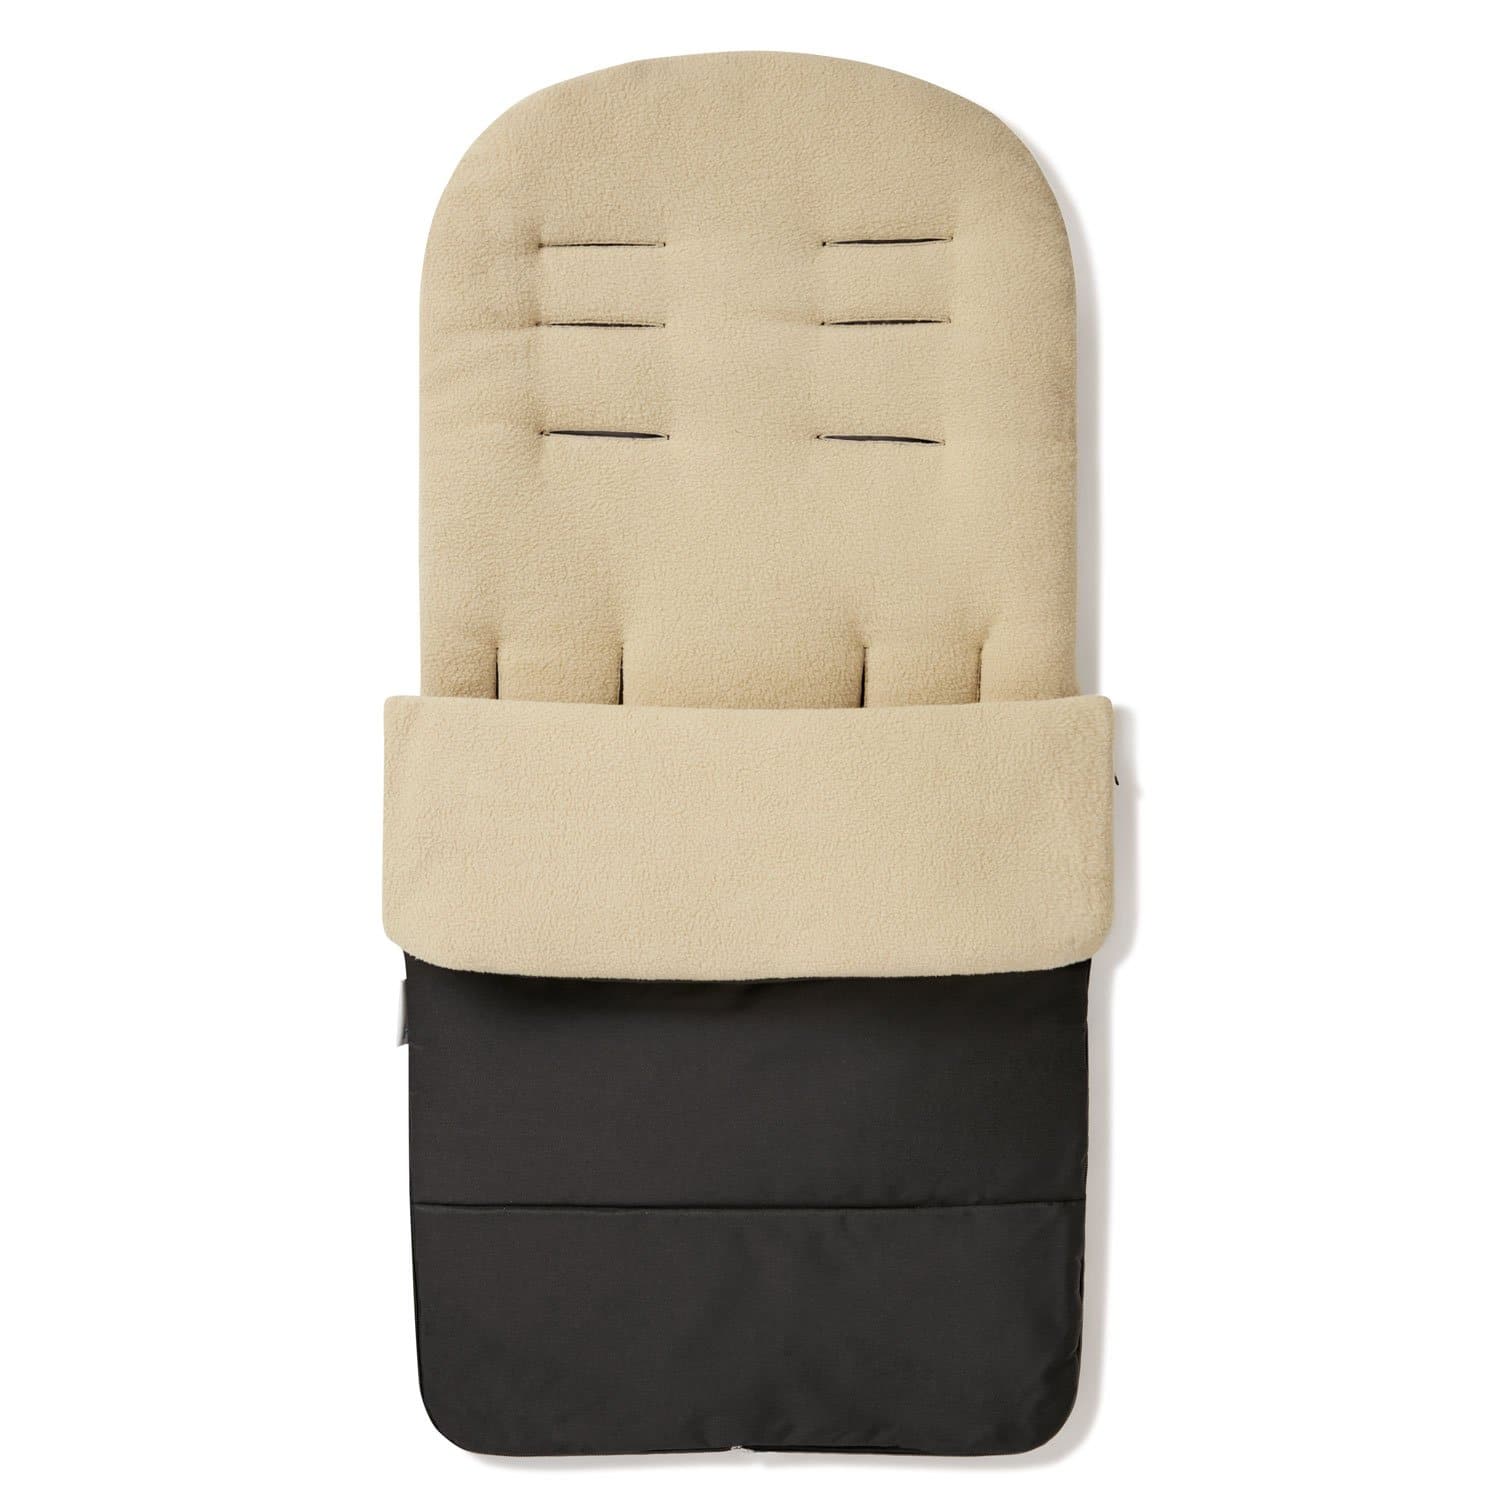 Premium Footmuff / Cosy Toes Compatible with Combi - Desert Sand / Fits All Models | For Your Little One